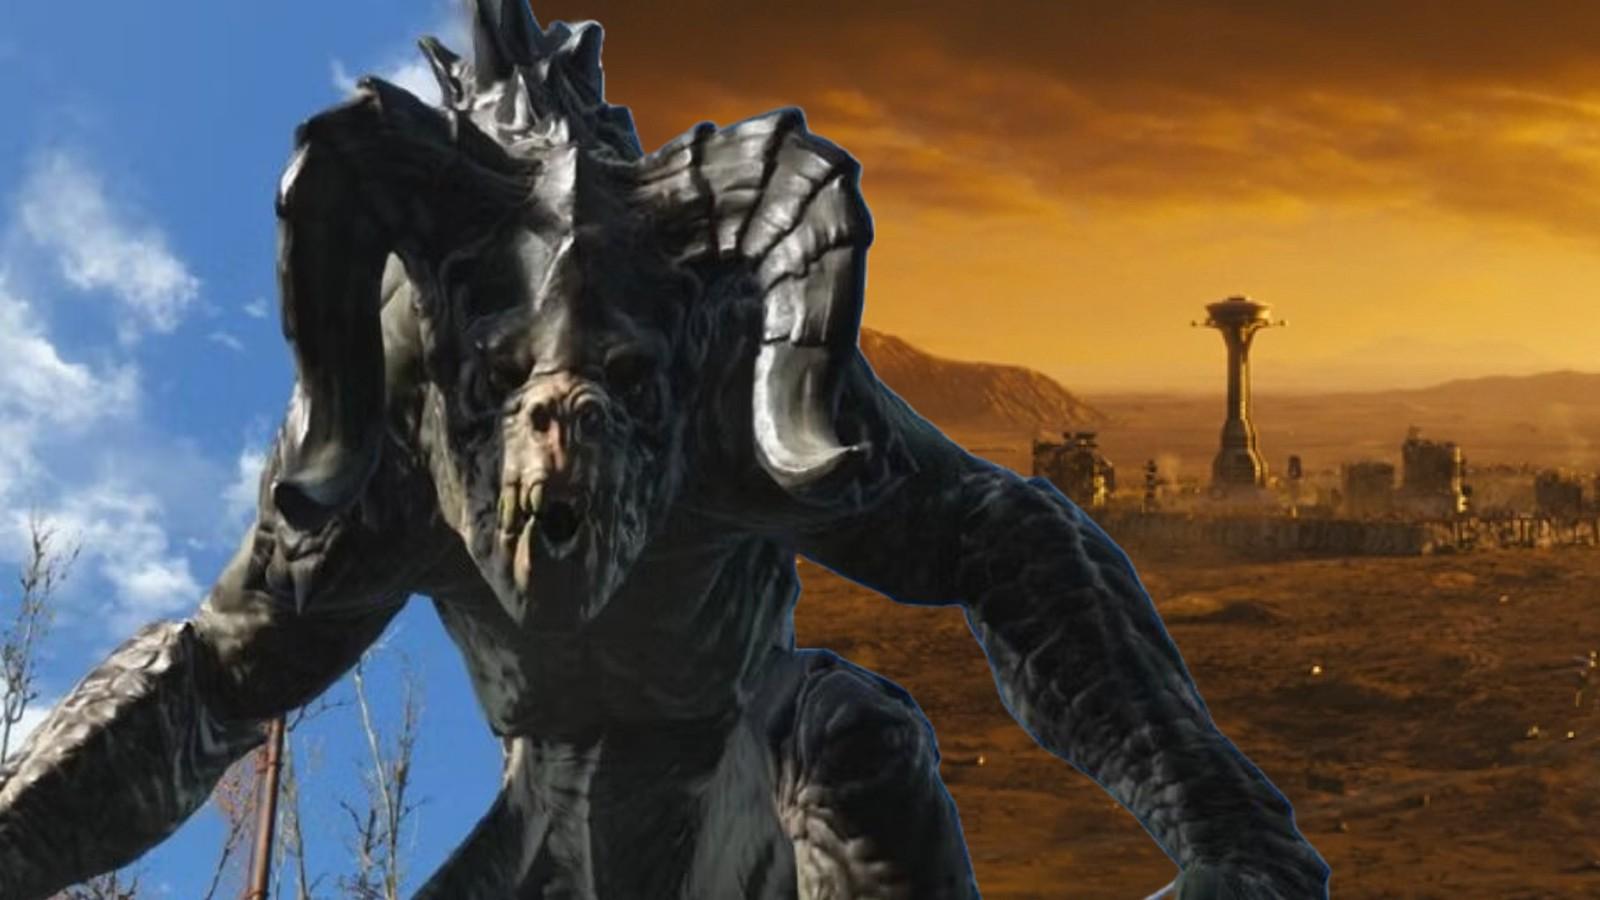 Deathclaw from Fallout and New Vegas at the end of the TV series